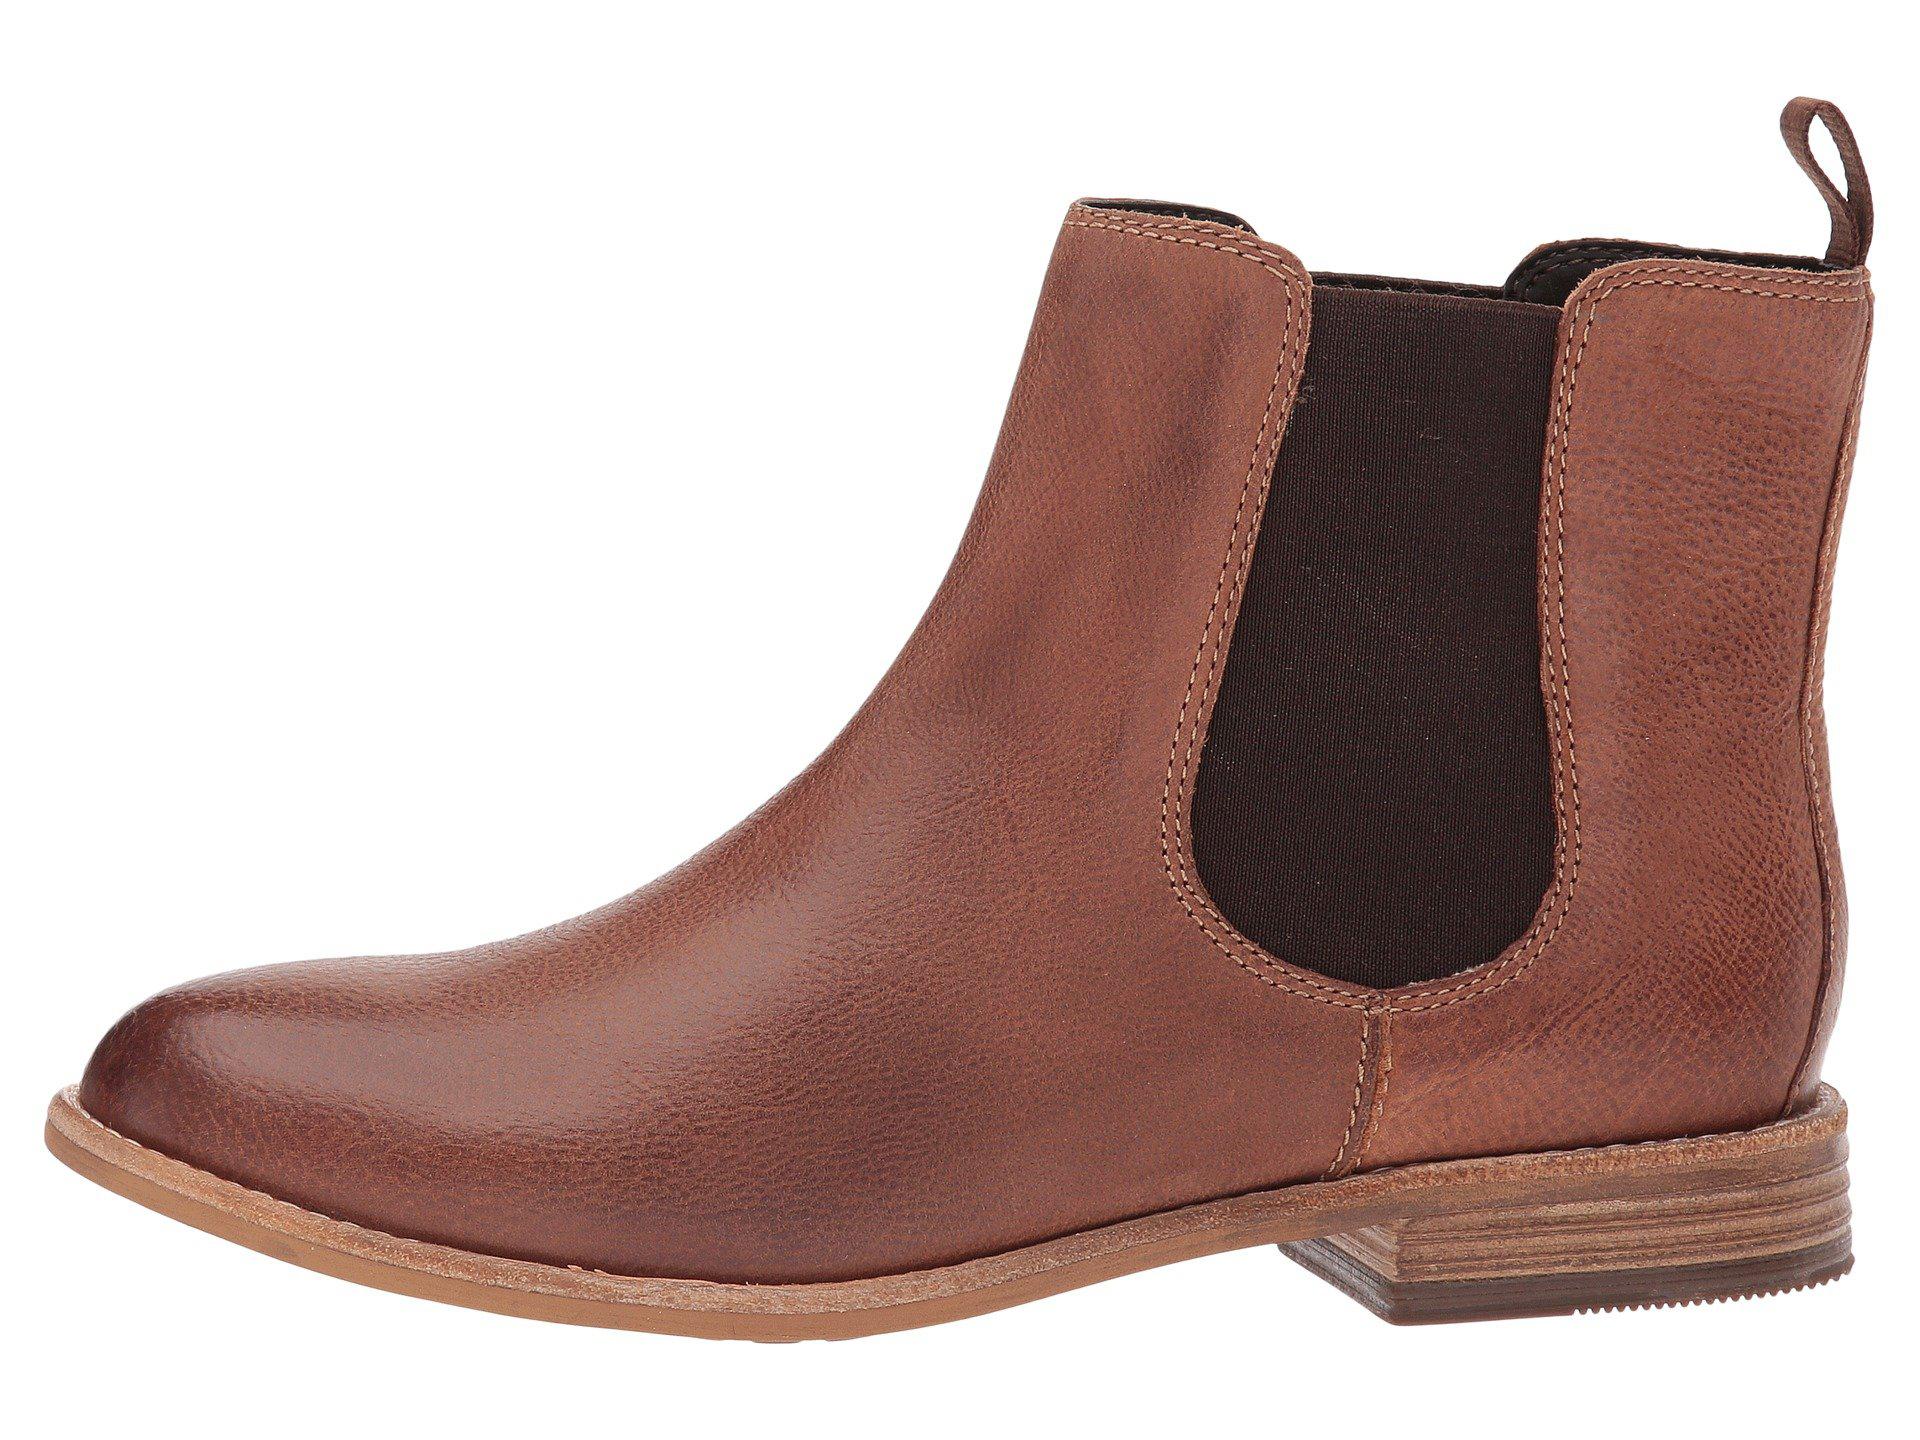 Clarks Leather Maypearl Nala Ankle 